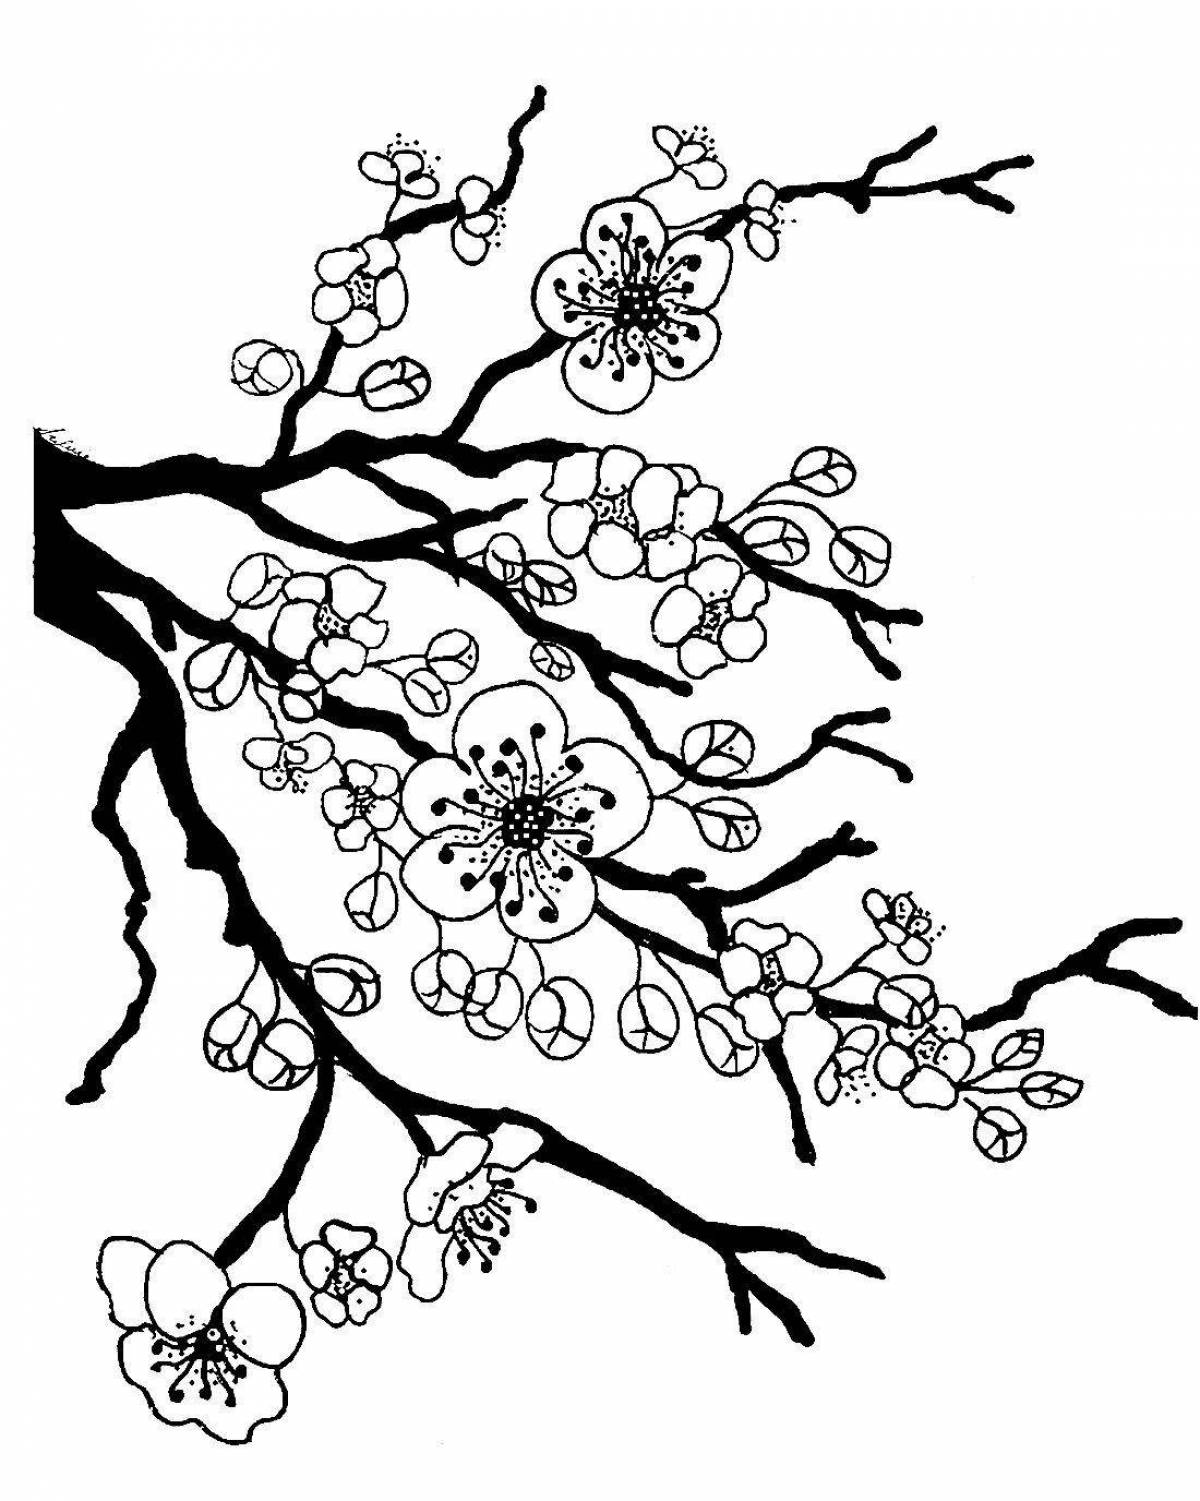 Coloring of a dazzling Japanese tree